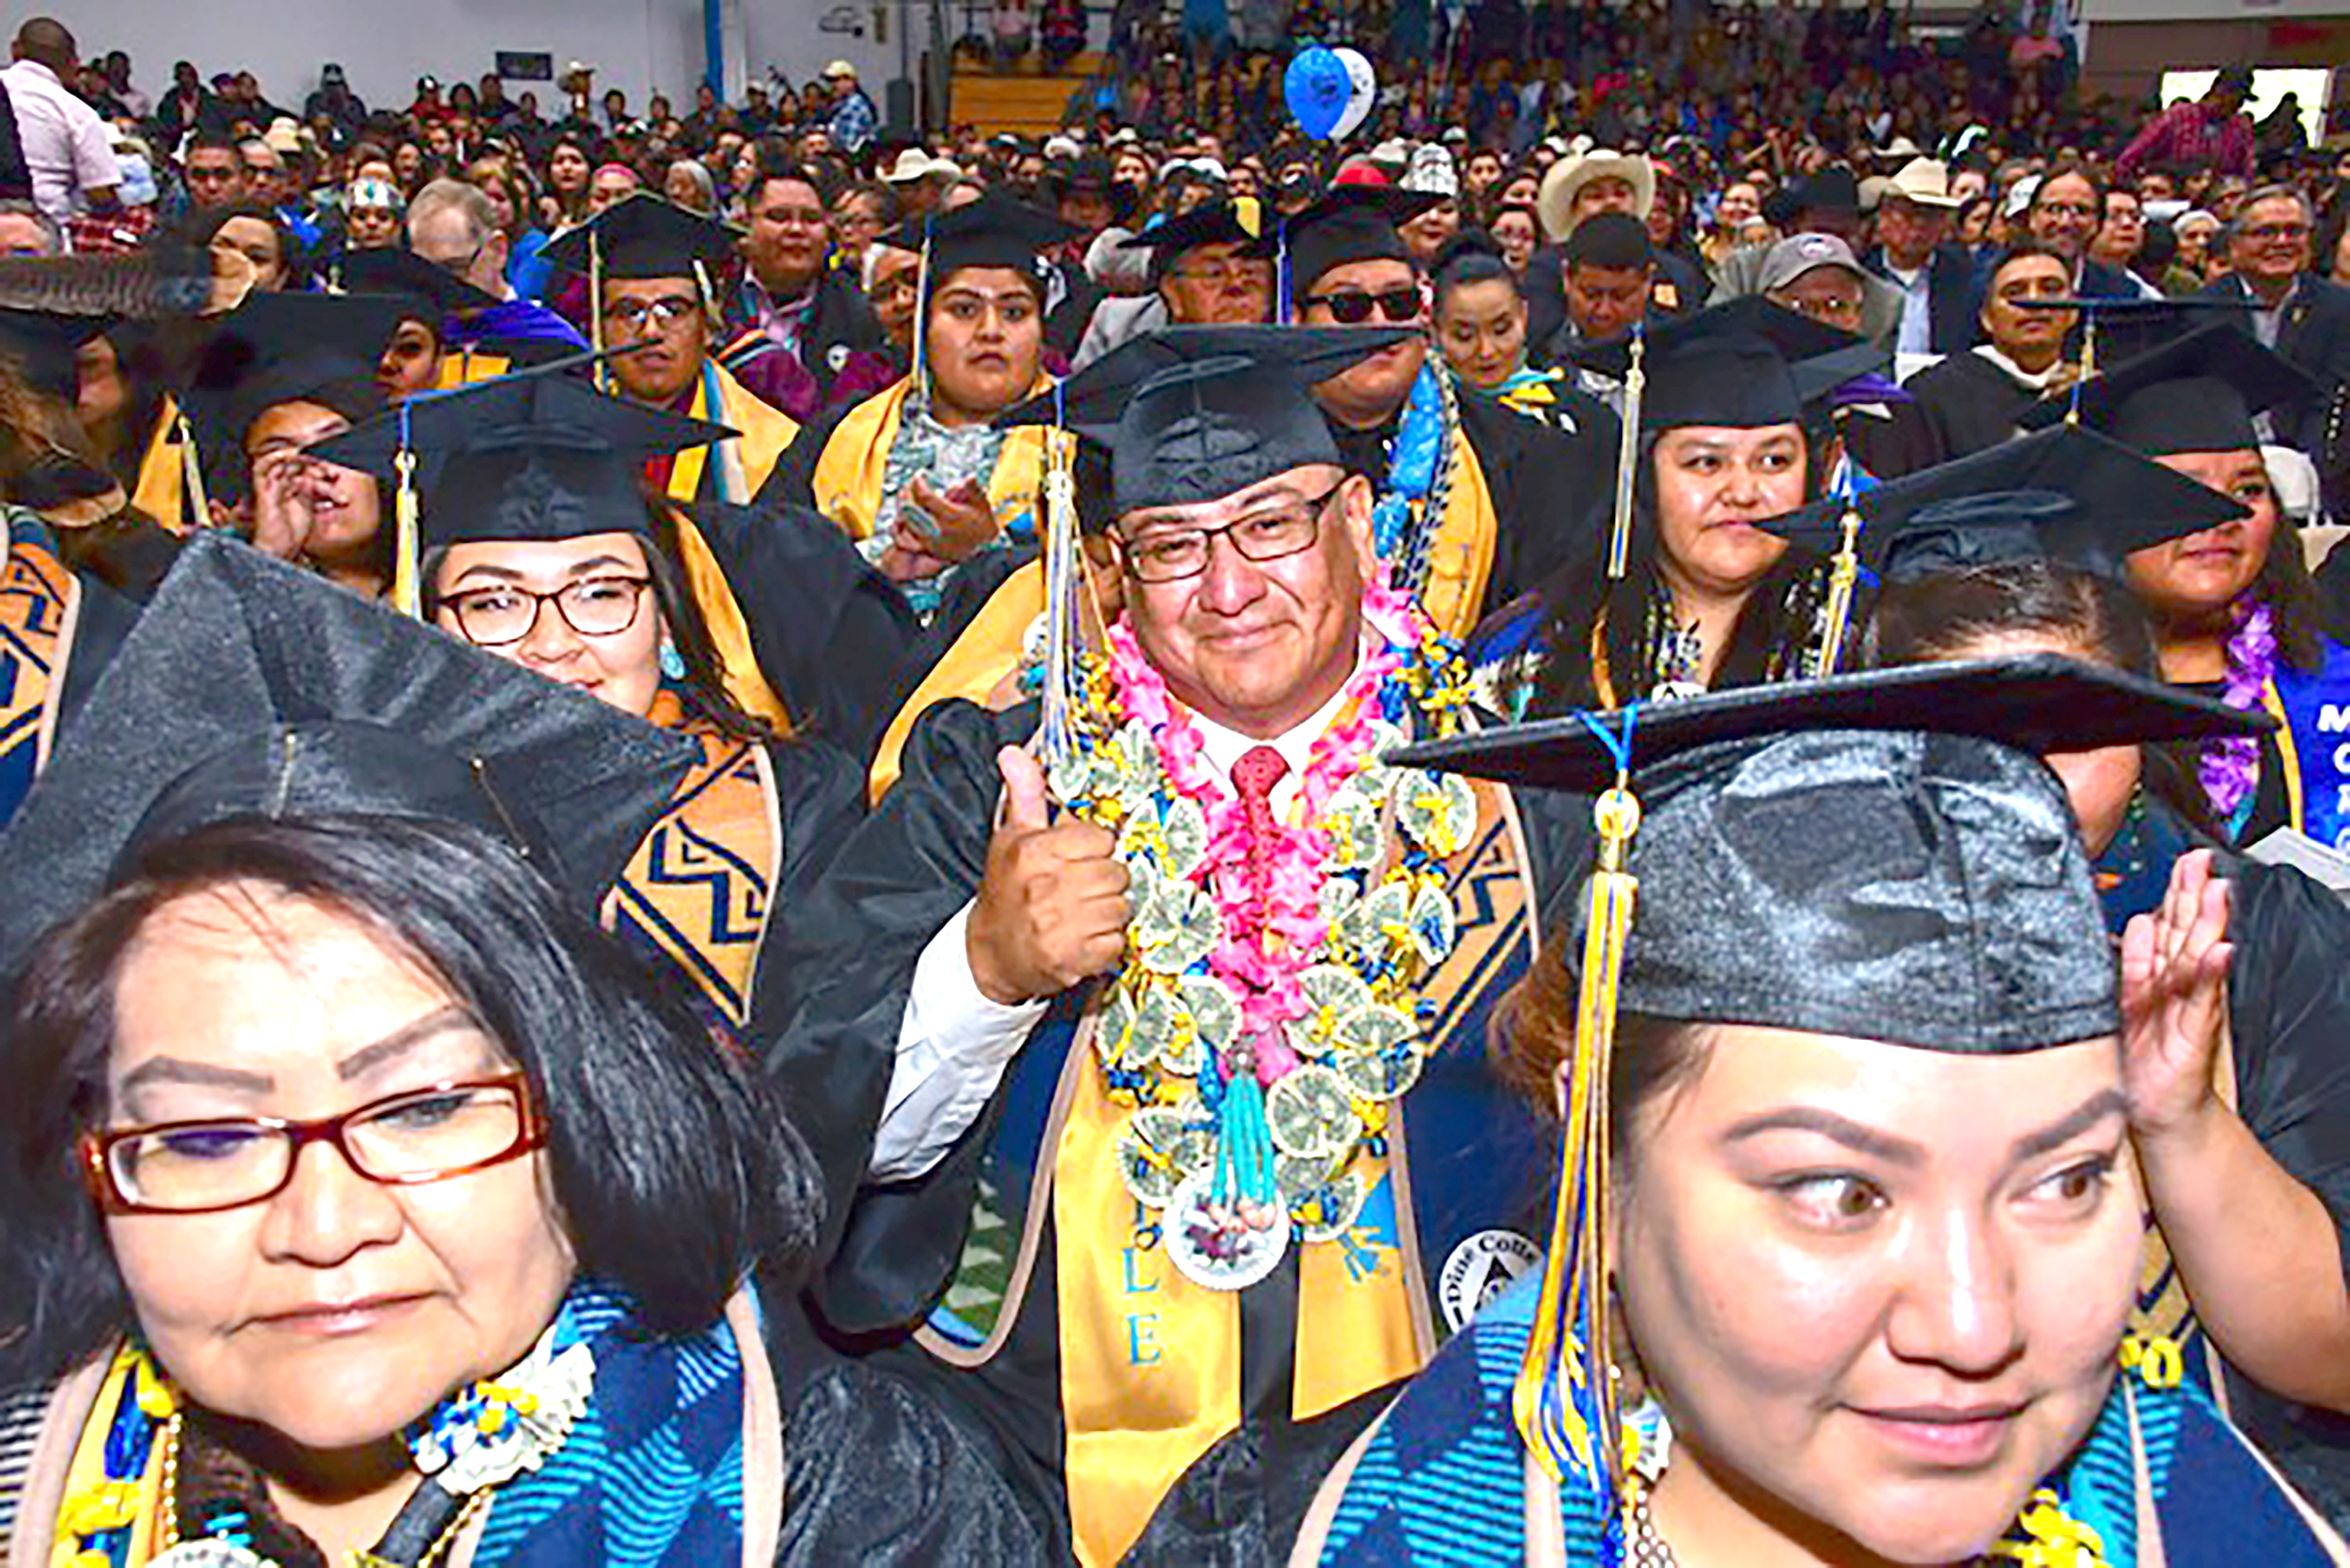 News Release - Diné College is the first tribal college to grant faculty  status to their librarians - Diné College